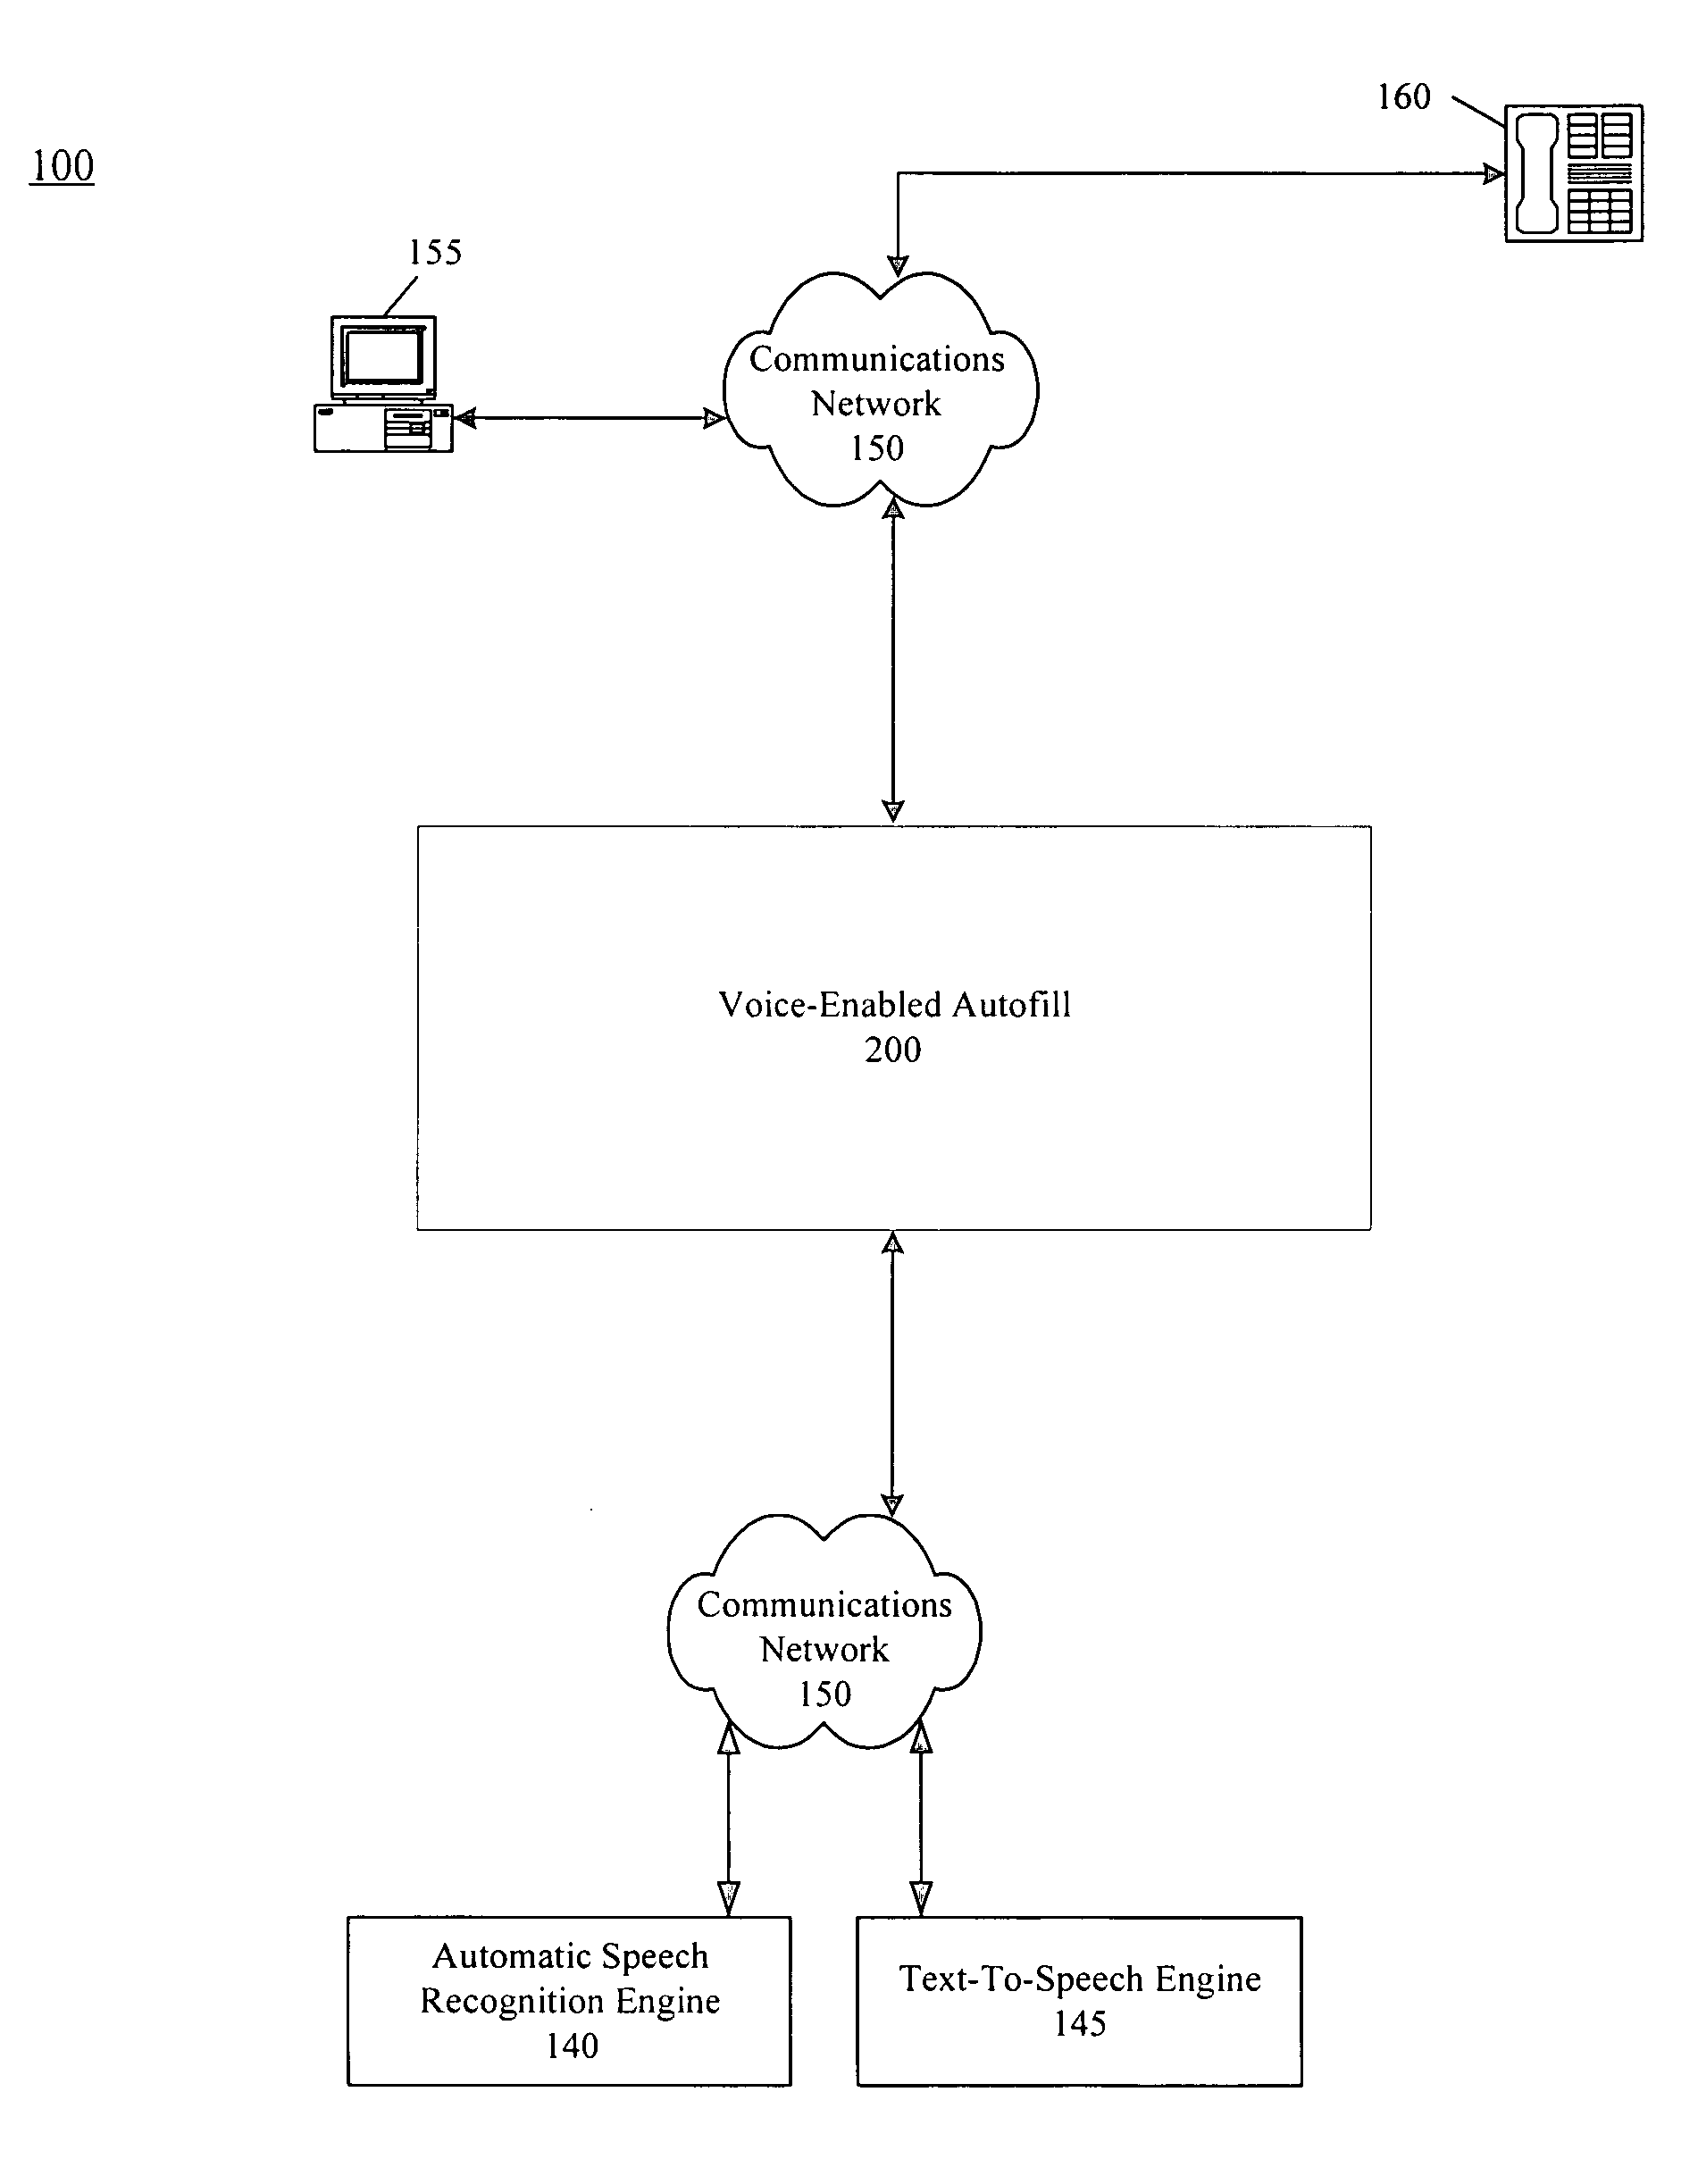 Method and system for voice-enabled autofill